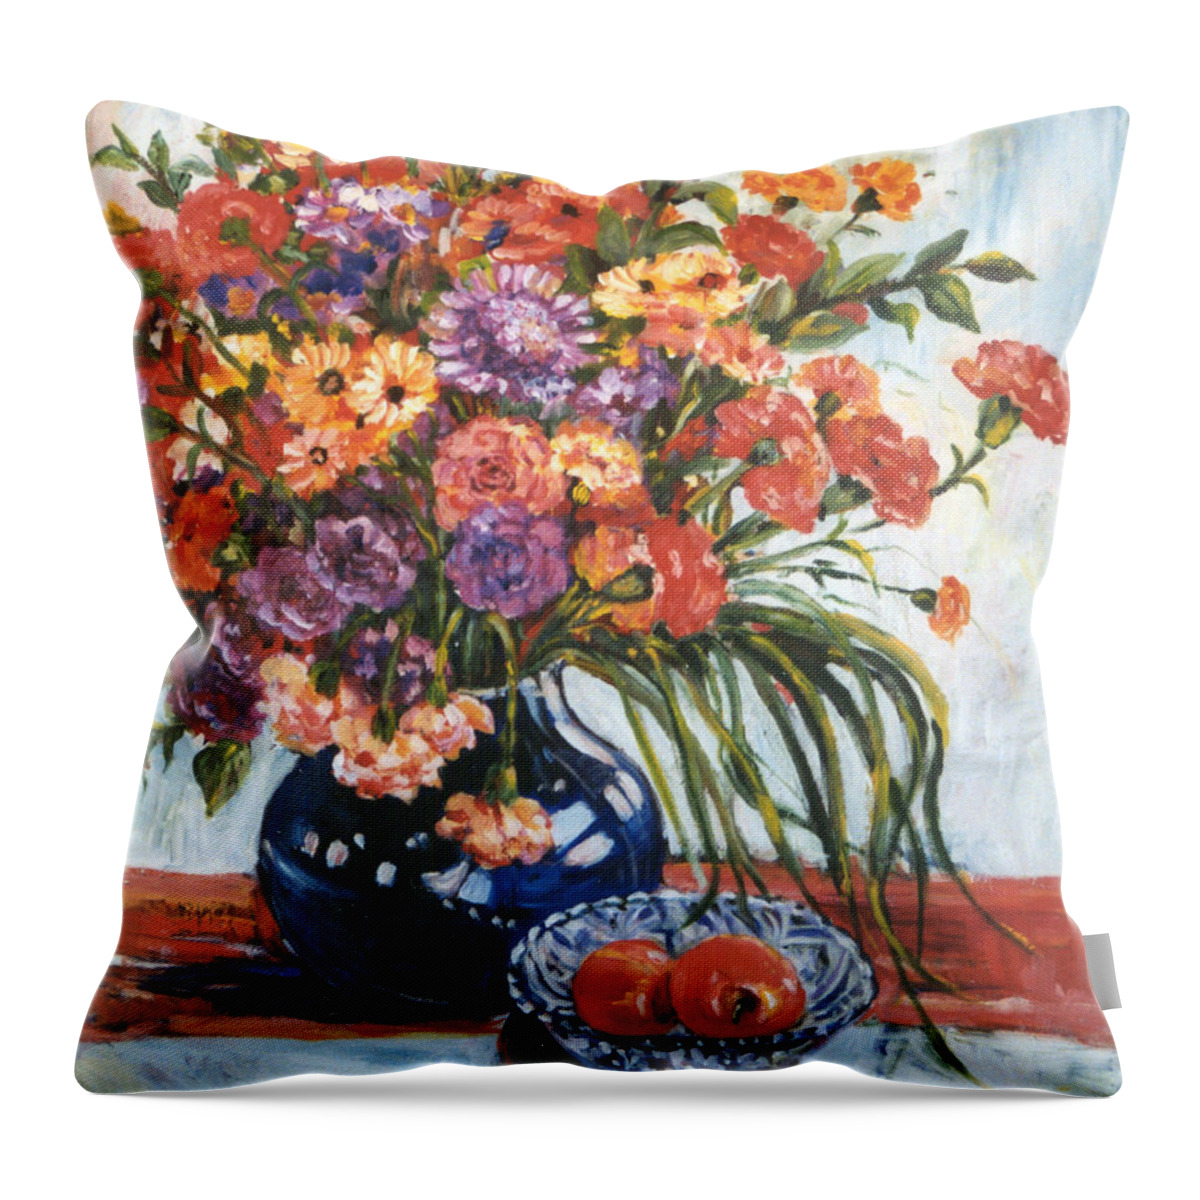 Ingrid Dohm Throw Pillow featuring the painting Arrangement II by Ingrid Dohm